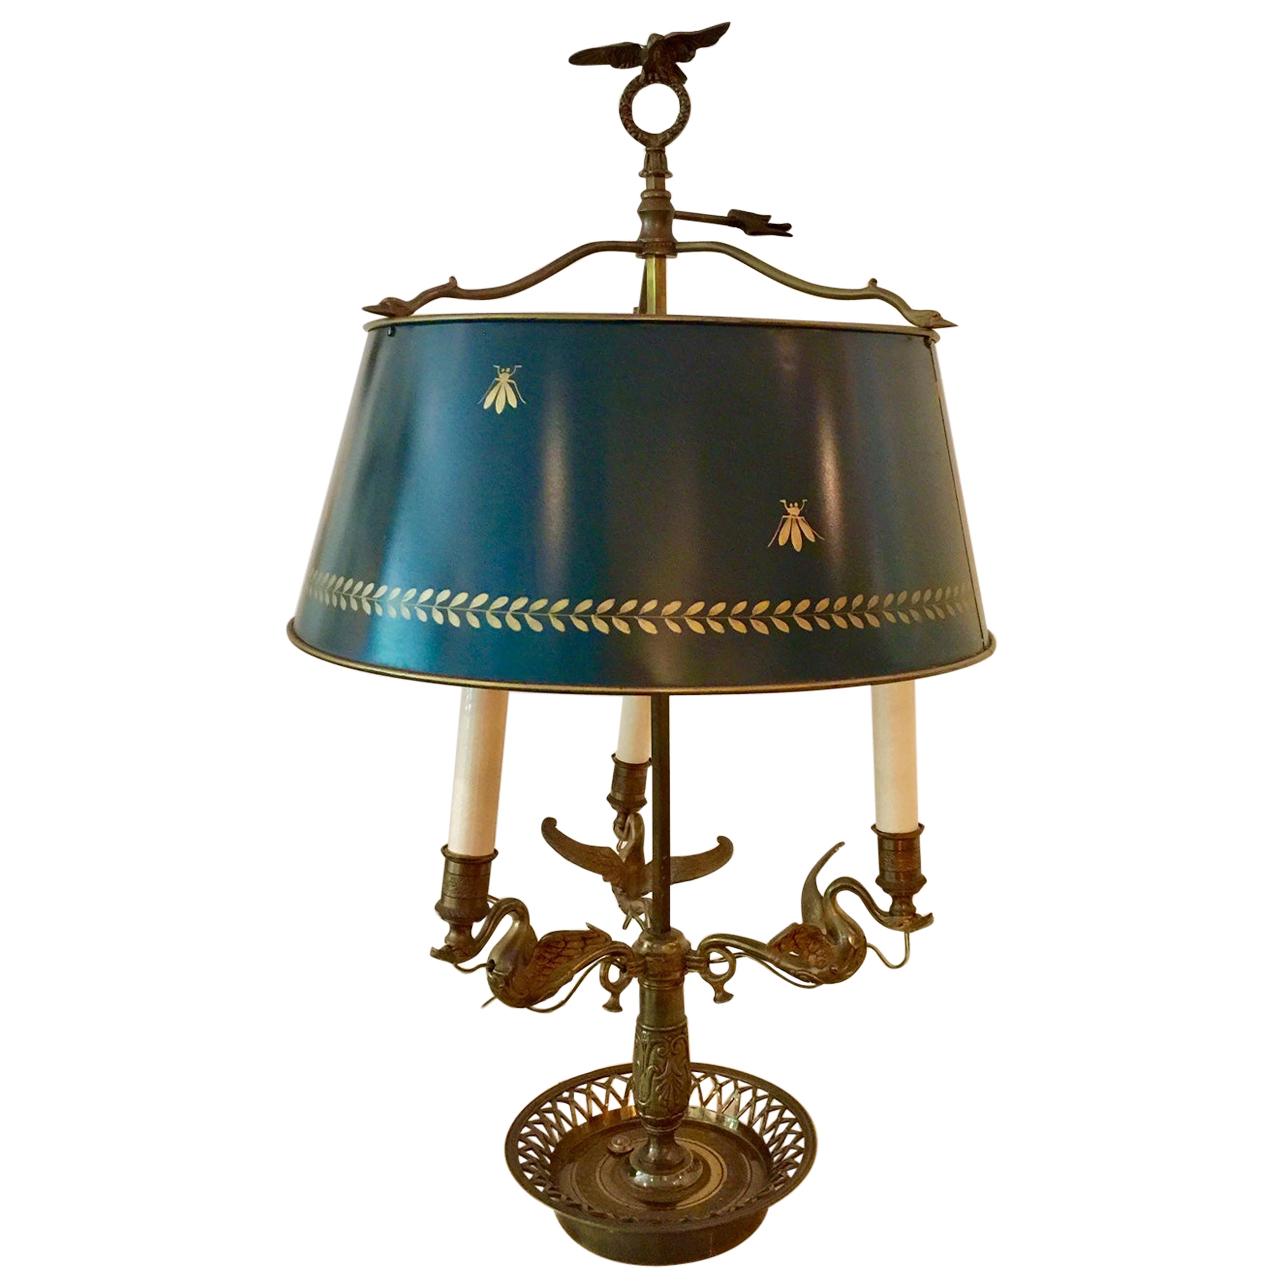 French Bouillotte Lamp, Bee and Laurel Leaf Decoration, Painted Green Tôle Shade For Sale